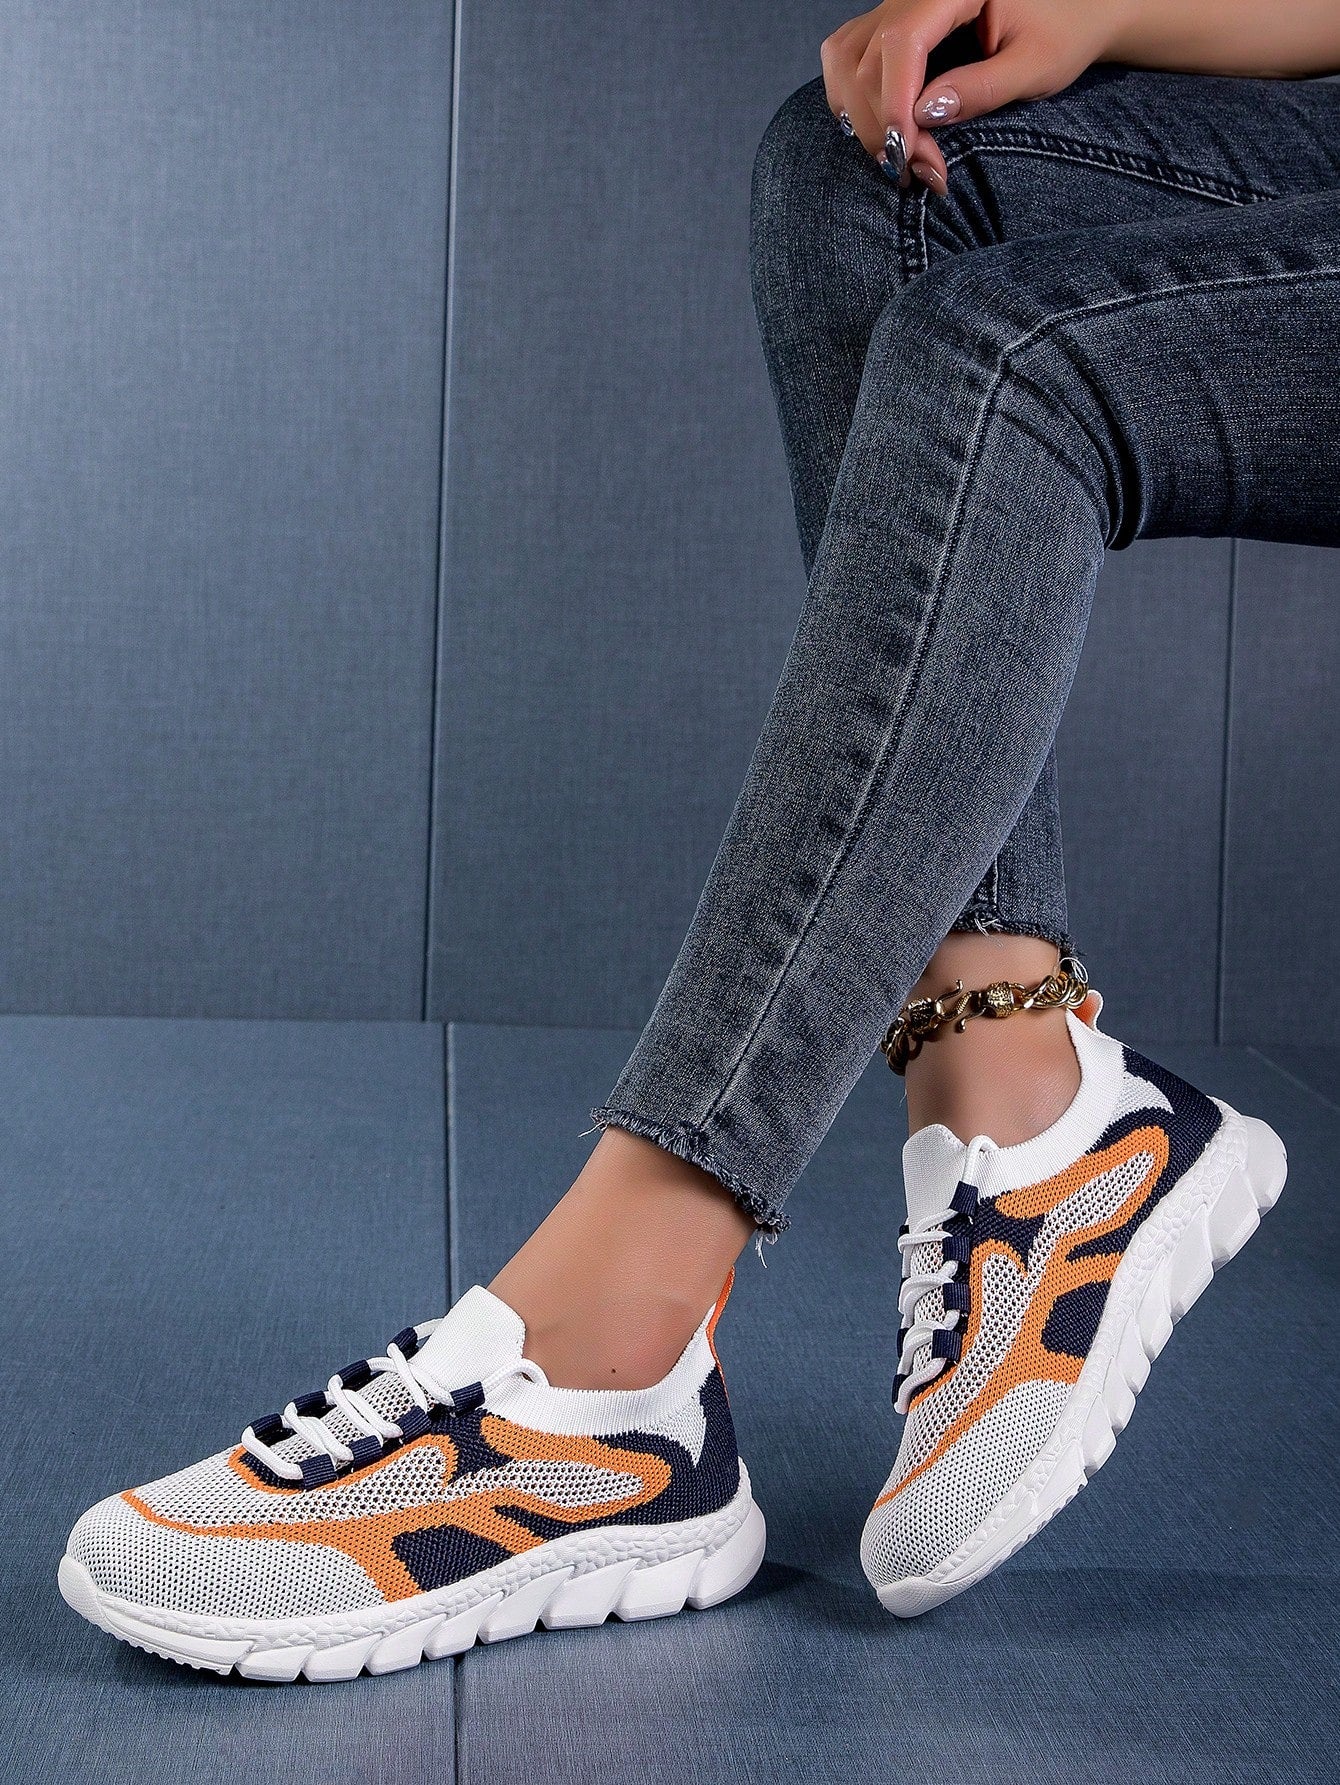 Women's Casual Running Shoes, New Spring And Autumn Soft Sole Color Block Breathable Casual Shoes, All-Match Sports Shoes, Personality Trendy Fashion, Slip-Resistant, Odor-Resistant, Wear-Resistant, Lightweight, Outdoor Driving And Work Shoes,-Orange-2